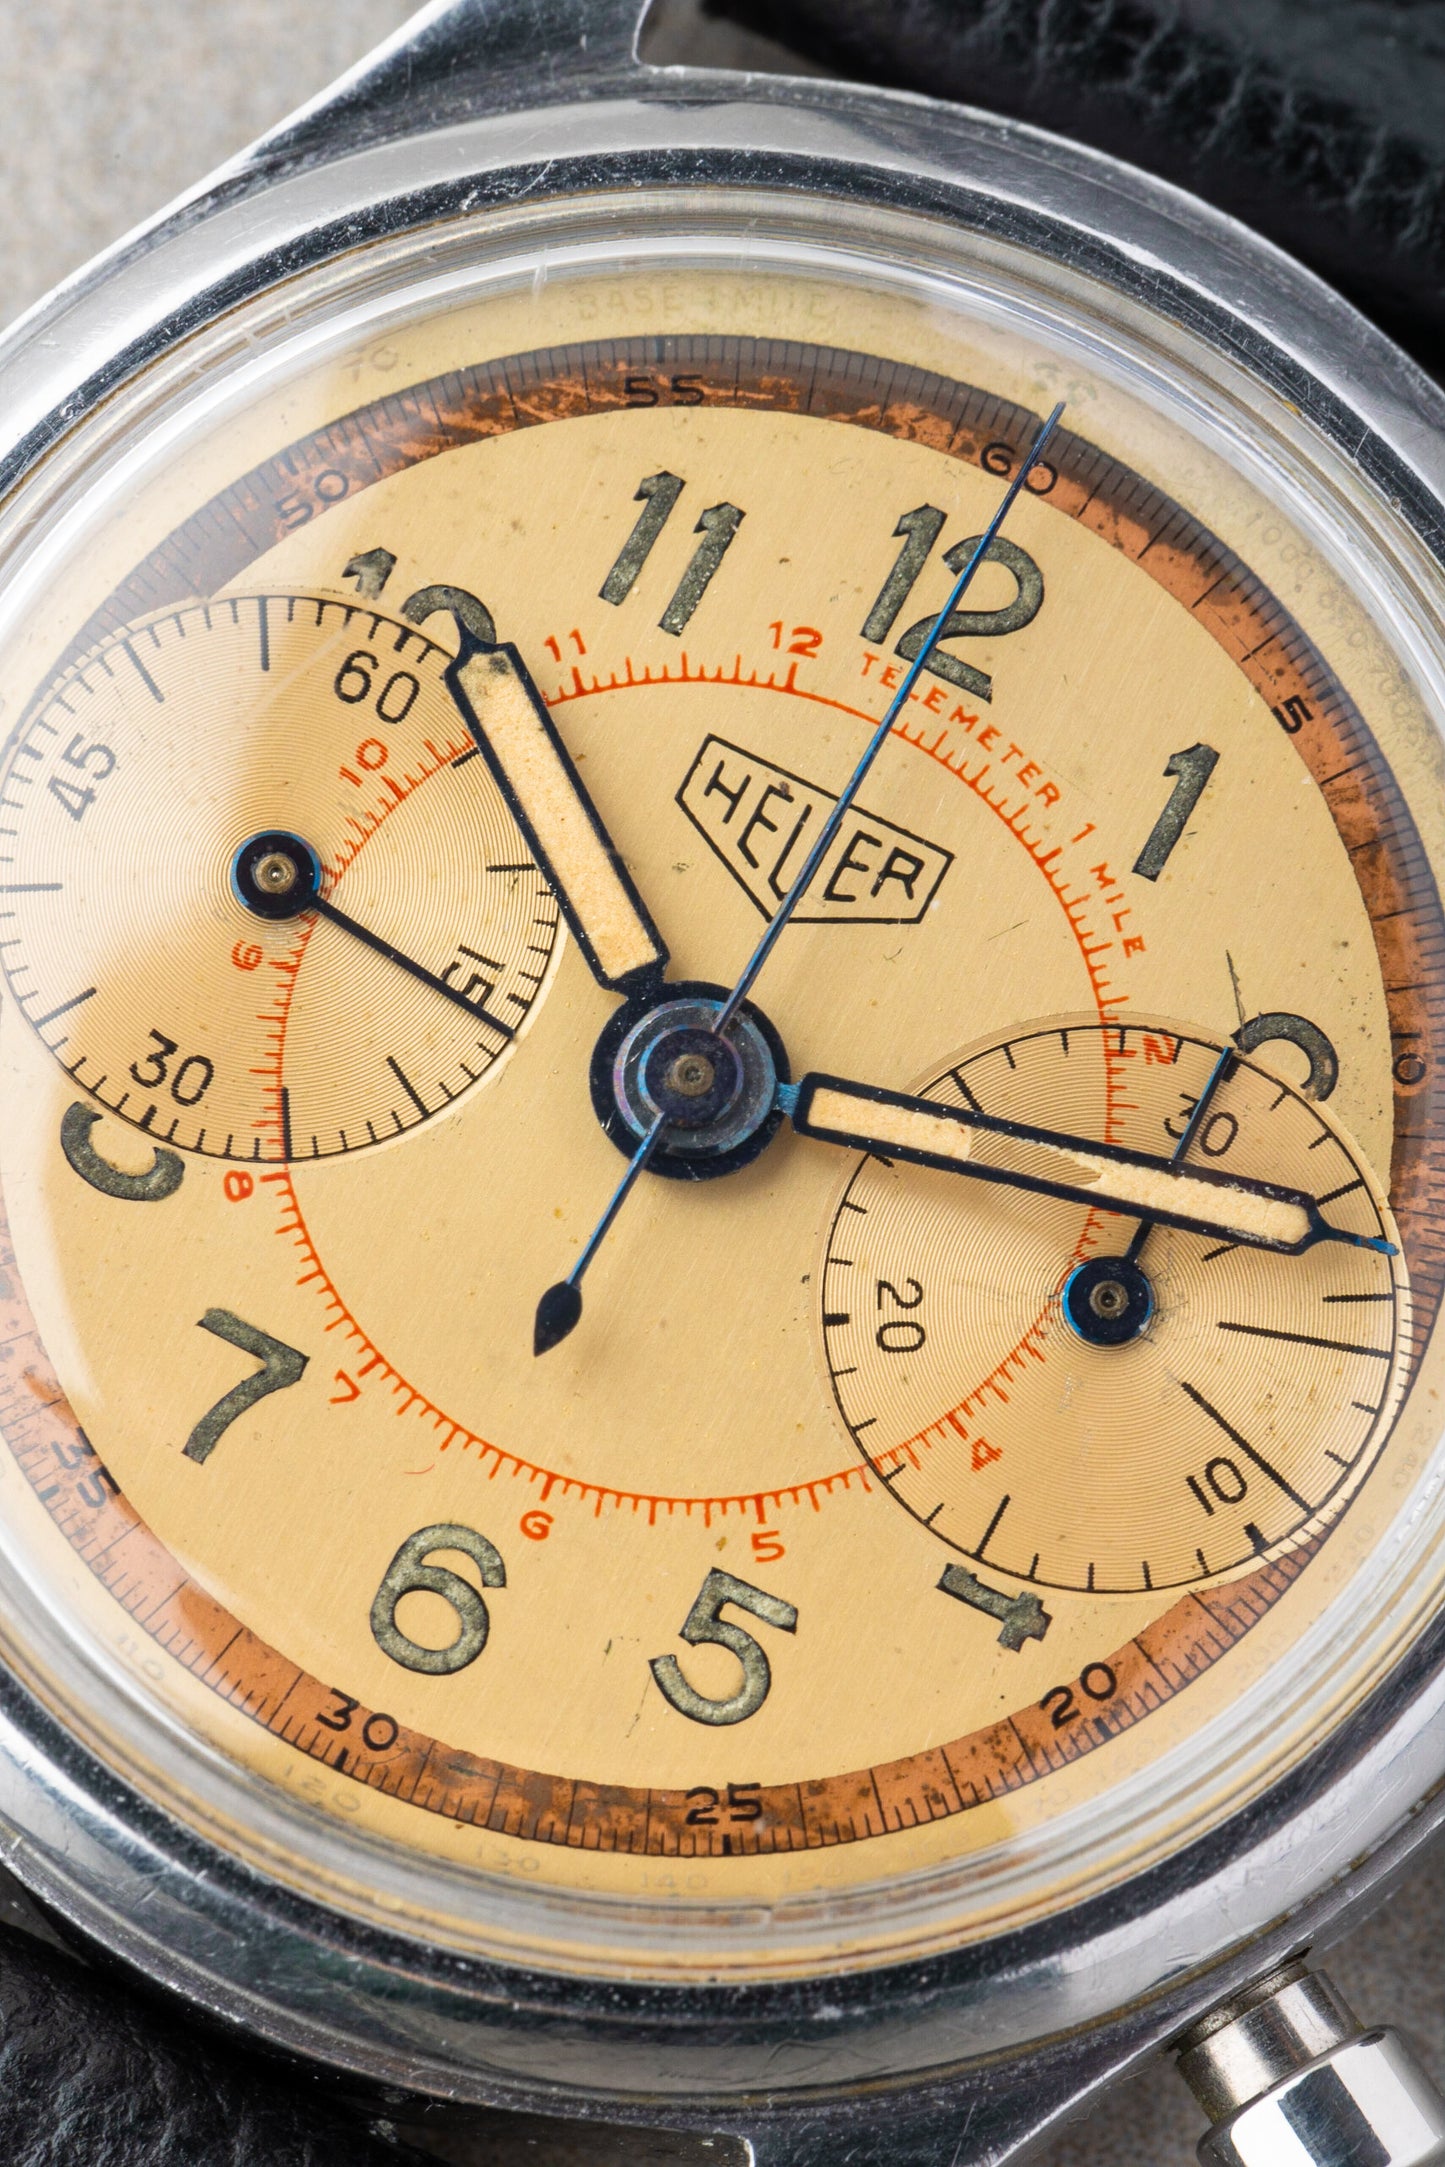 1940s Heuer Big Eyes Chronograph Ref. 59818 With Salmon Dial